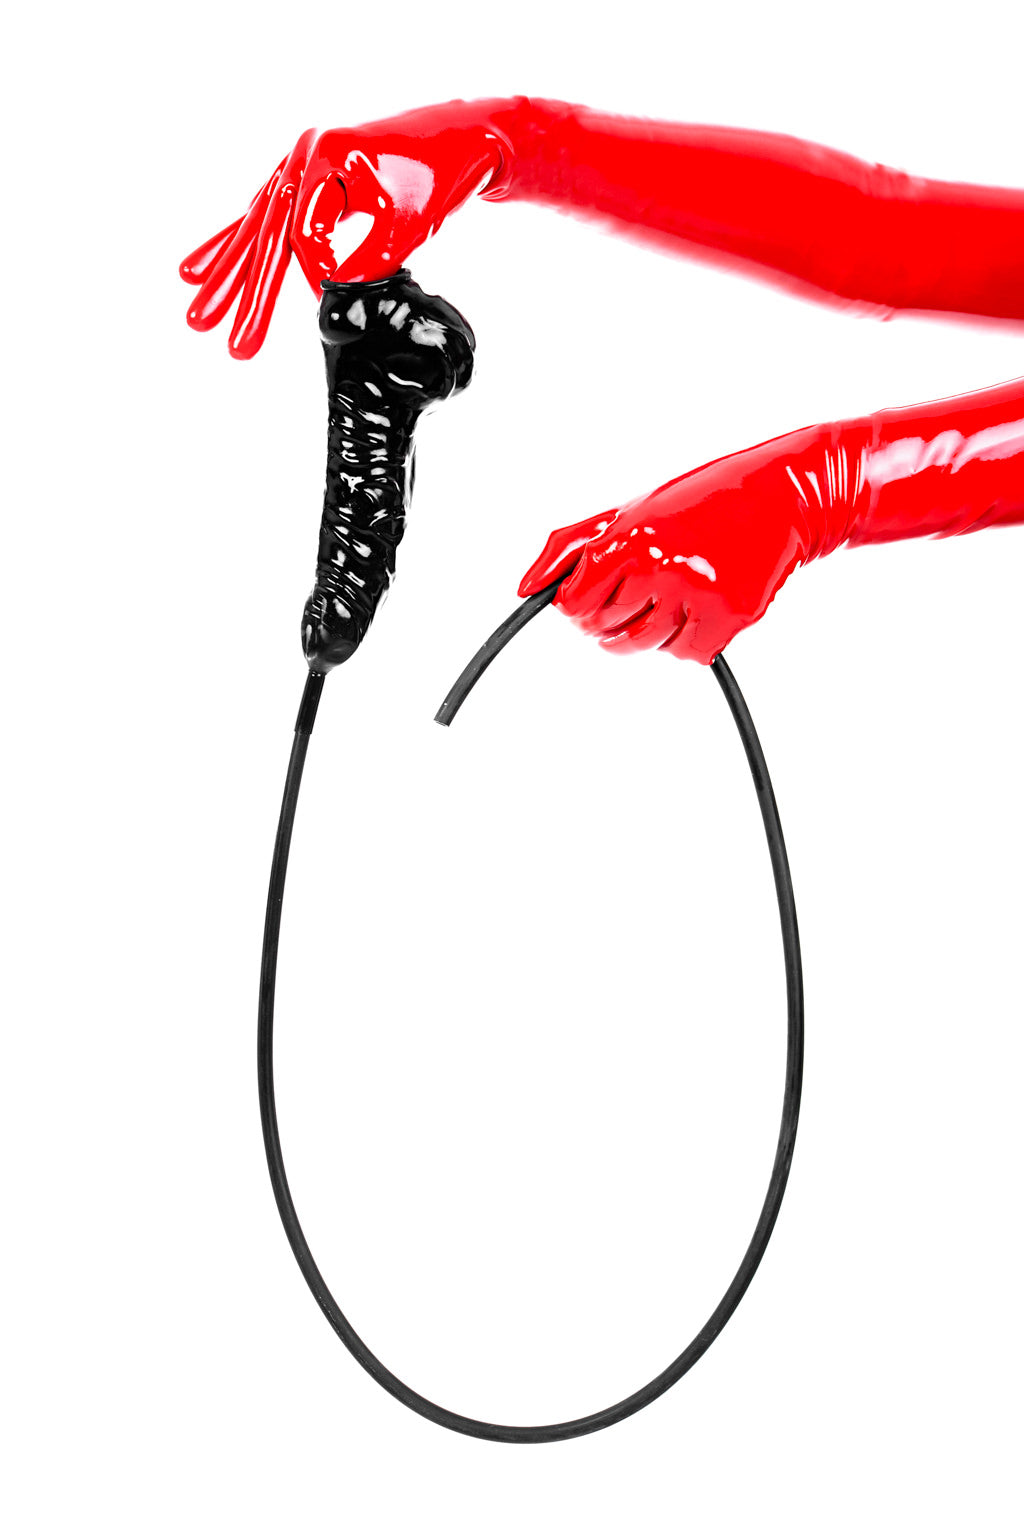 Red latex gloves holding an anatomical cock and ball penis sheath with long flush tube.